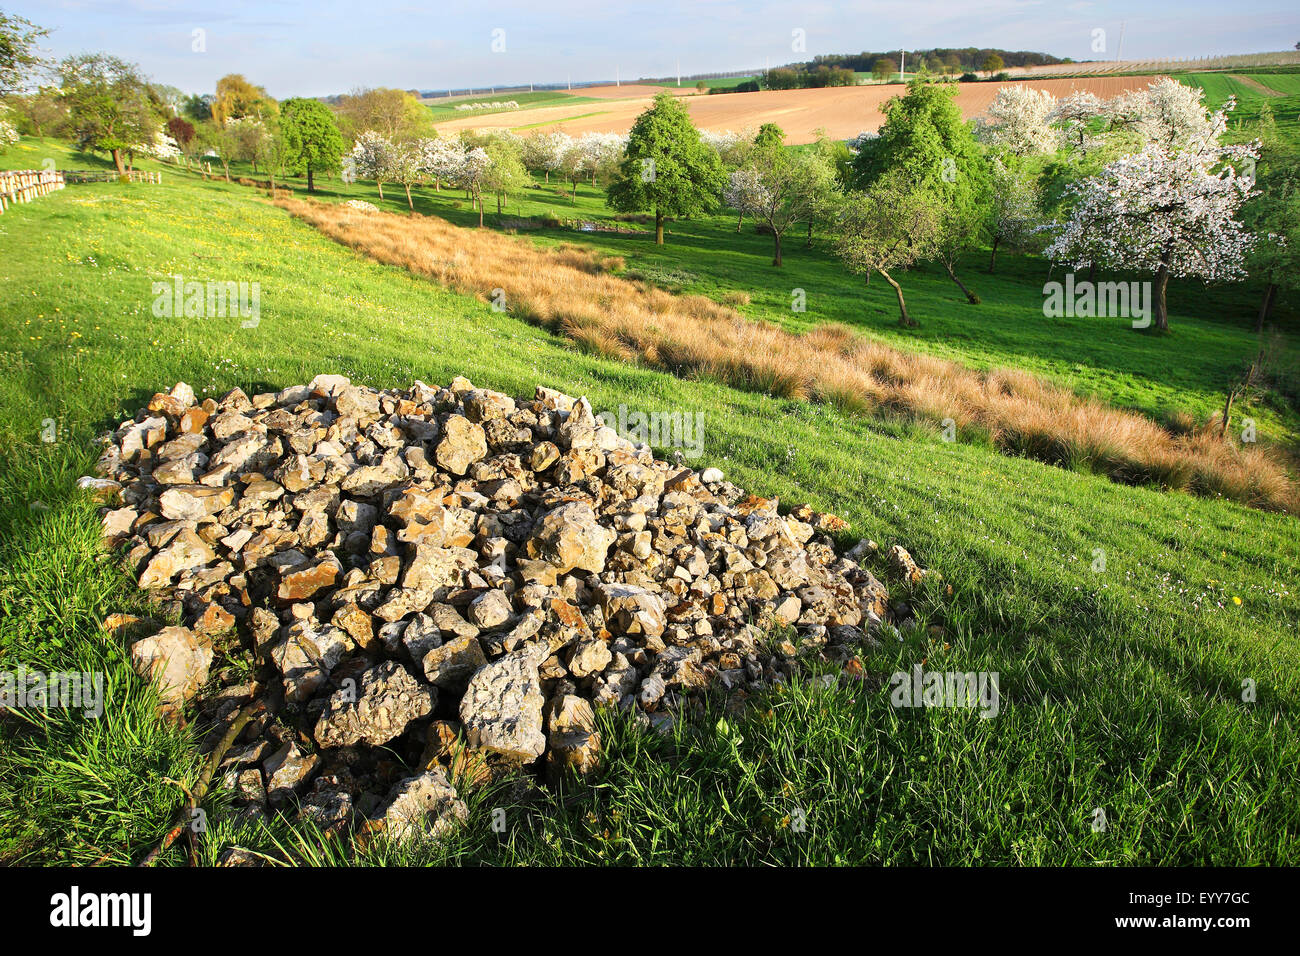 midwife toad (Alytes obstetricans), pile of stones in grassland with fruit trees, breeding and resting place for Midwife toad, Belgium Stock Photo